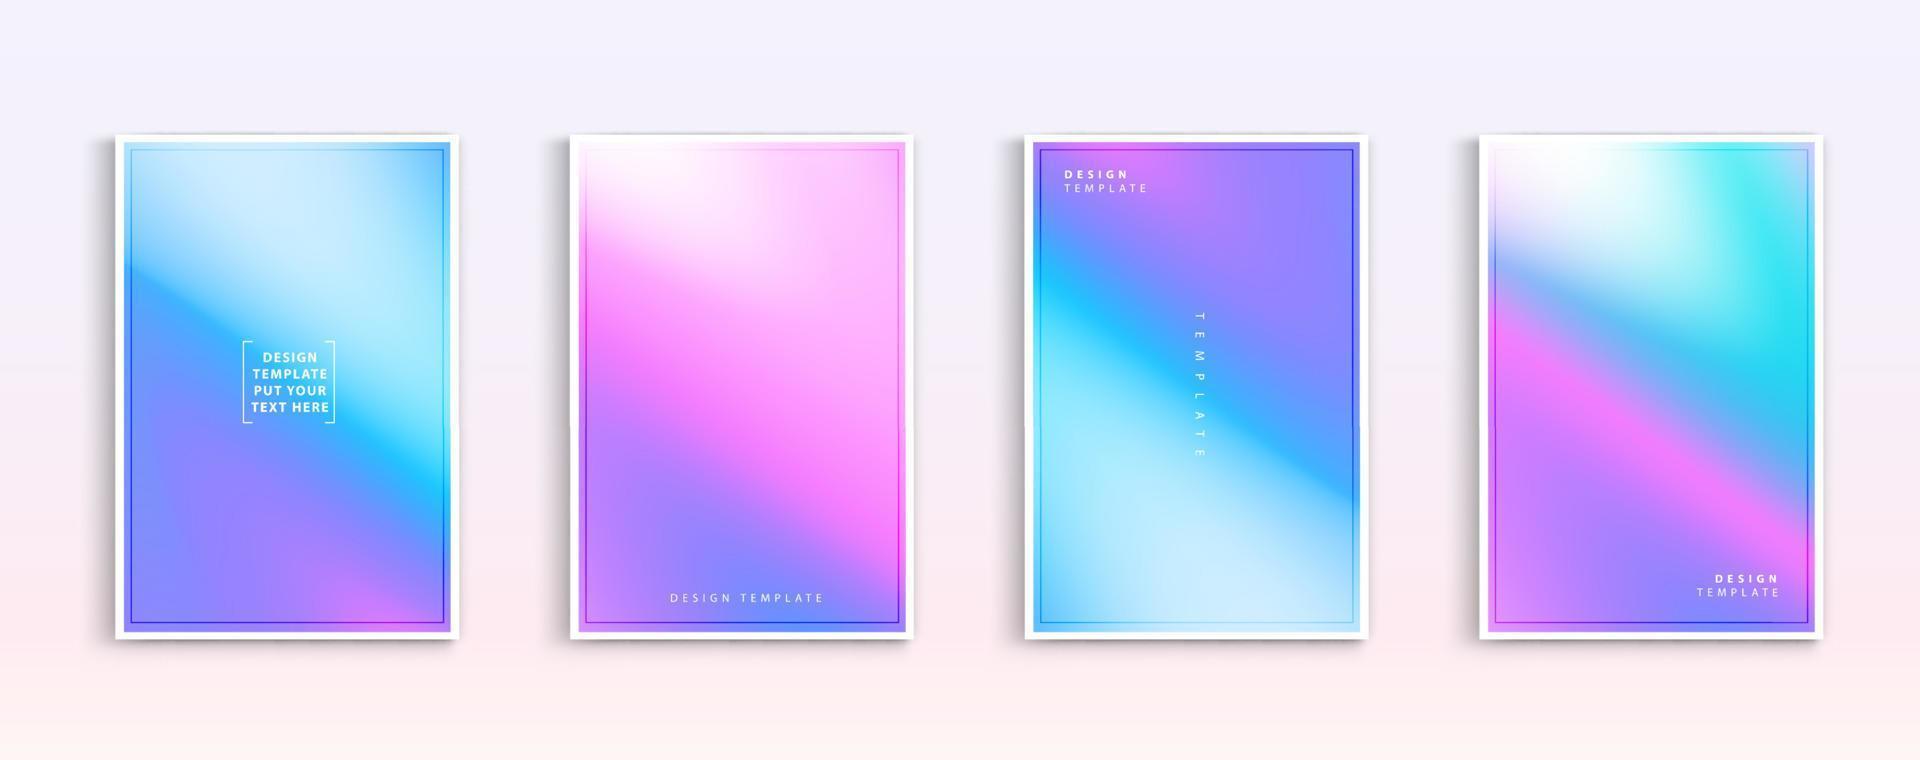 Pastel gradient backgrounds vector set. Soft tender pink, blue and purple colours abstract background for app, web design, webpages, banners, greeting cards. Vector illustration design